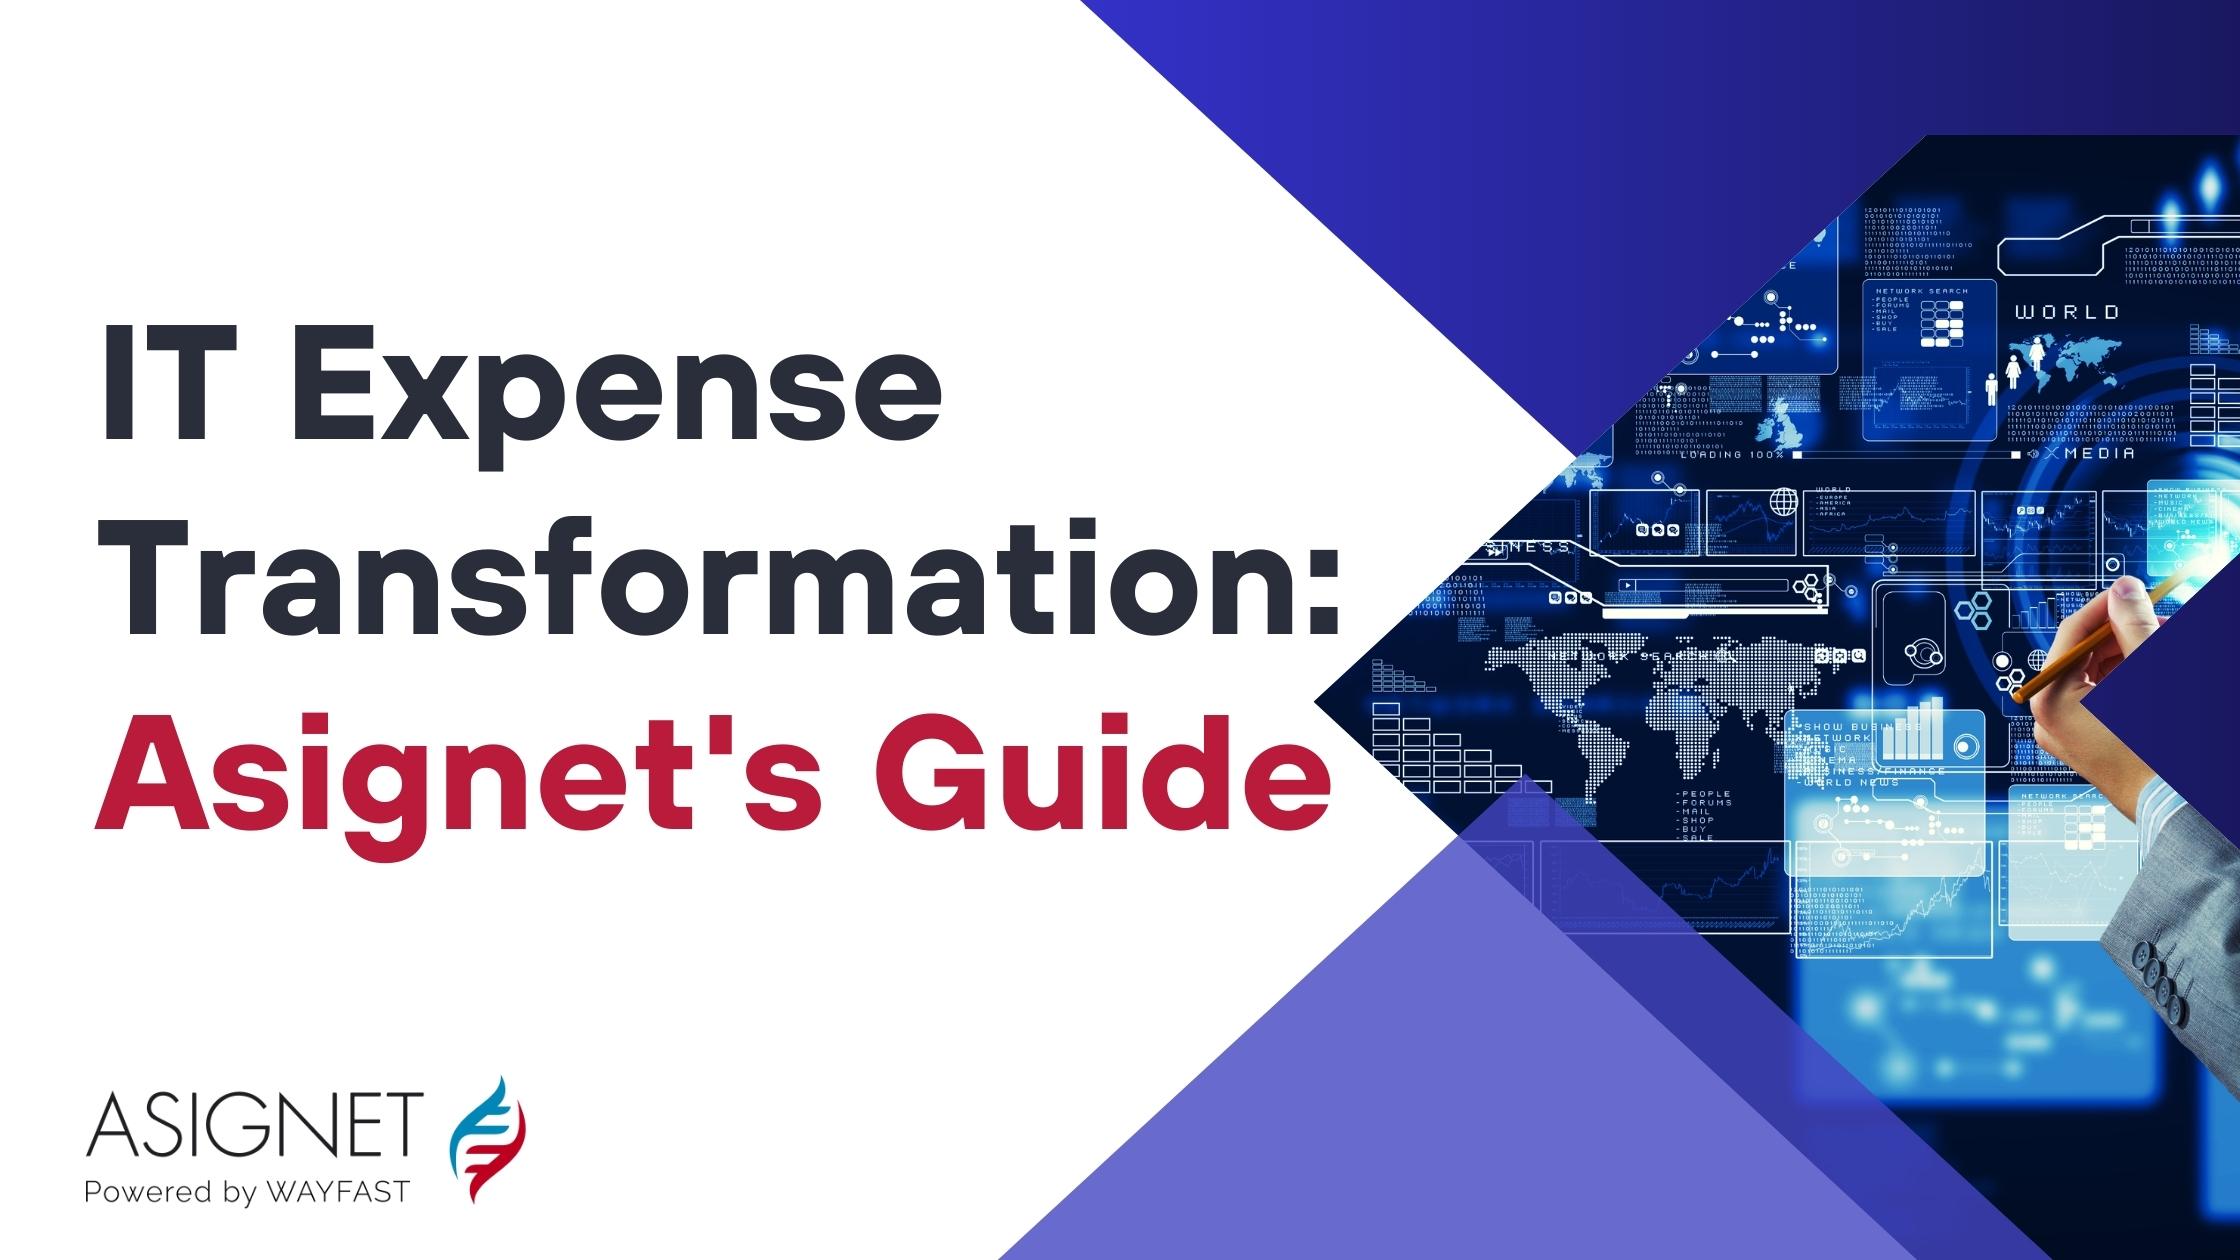 IT Expense Transformation: Asignet's Guide